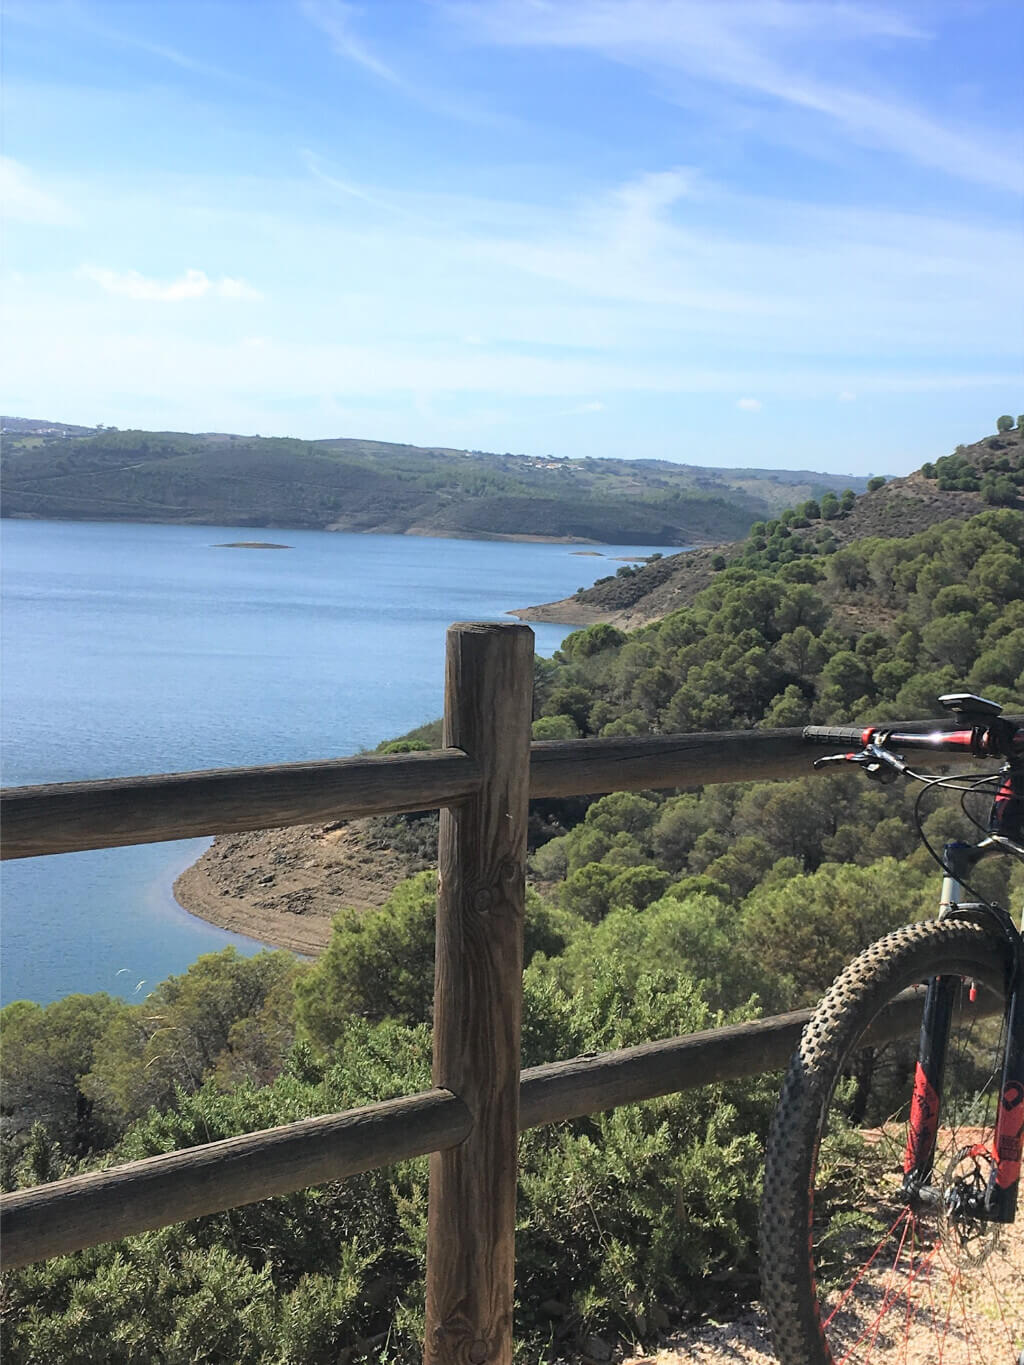 Algarve Cycling Tours - <br />
<b>Notice</b>:  Trying to access array offset on value of type bool in <b>/home/acyclingcom/public_html/tour-detail.php</b> on line <b>253</b><br />
 - MTB Trans-Algarve Hinterlandtour Algarviana 3.18